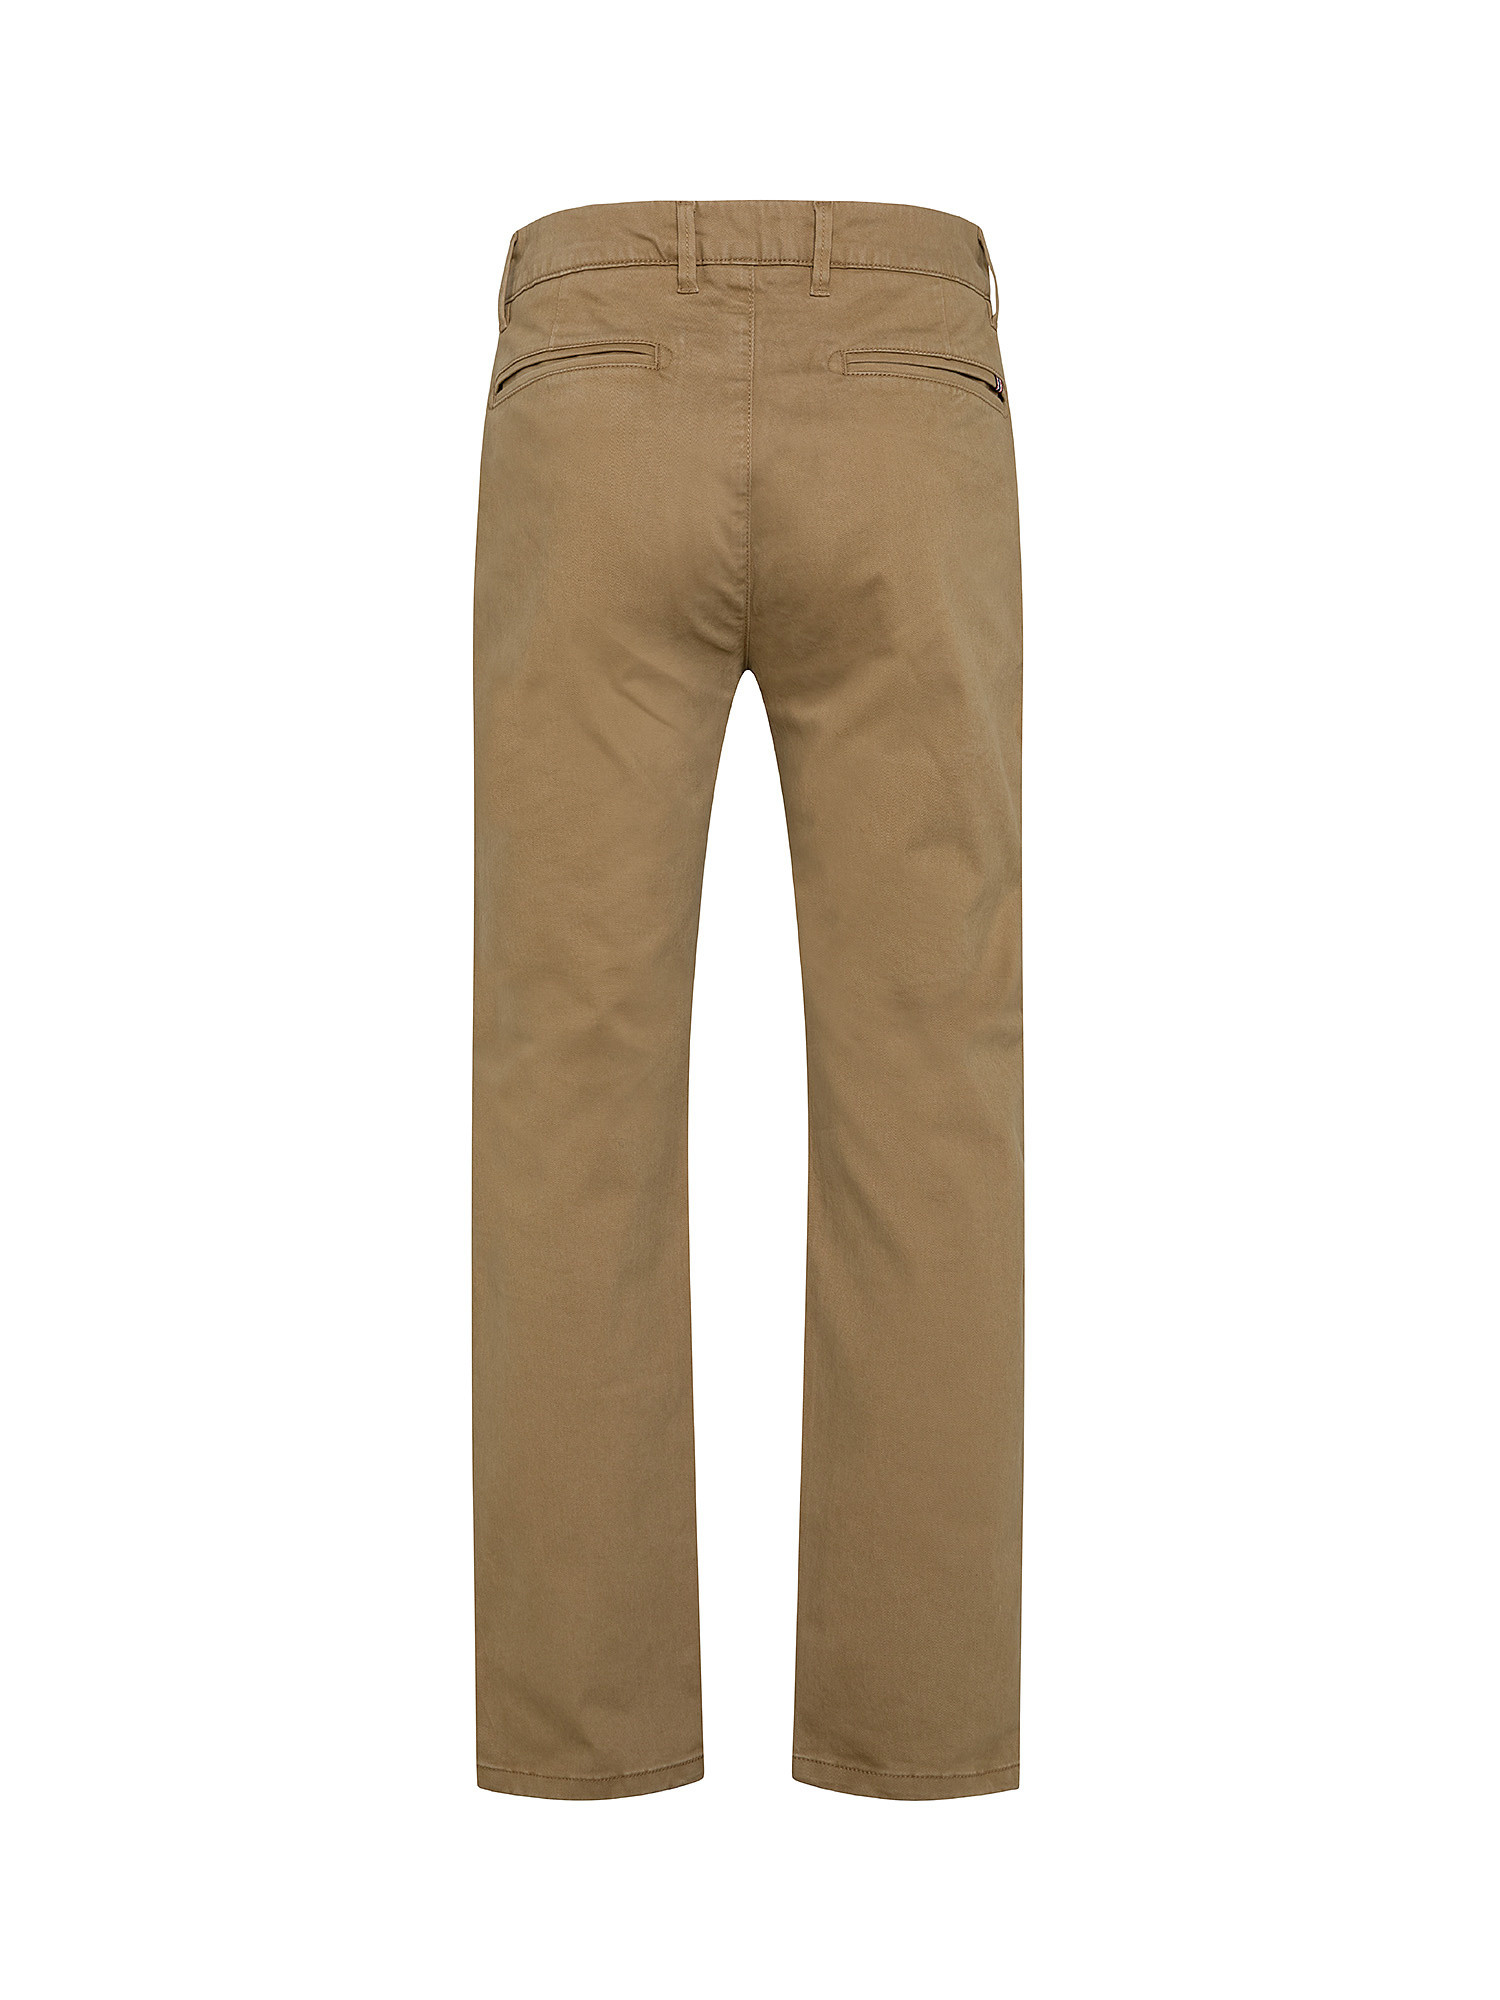 Pantalone chinos in cotone stretch, Marrone chiaro, large image number 1